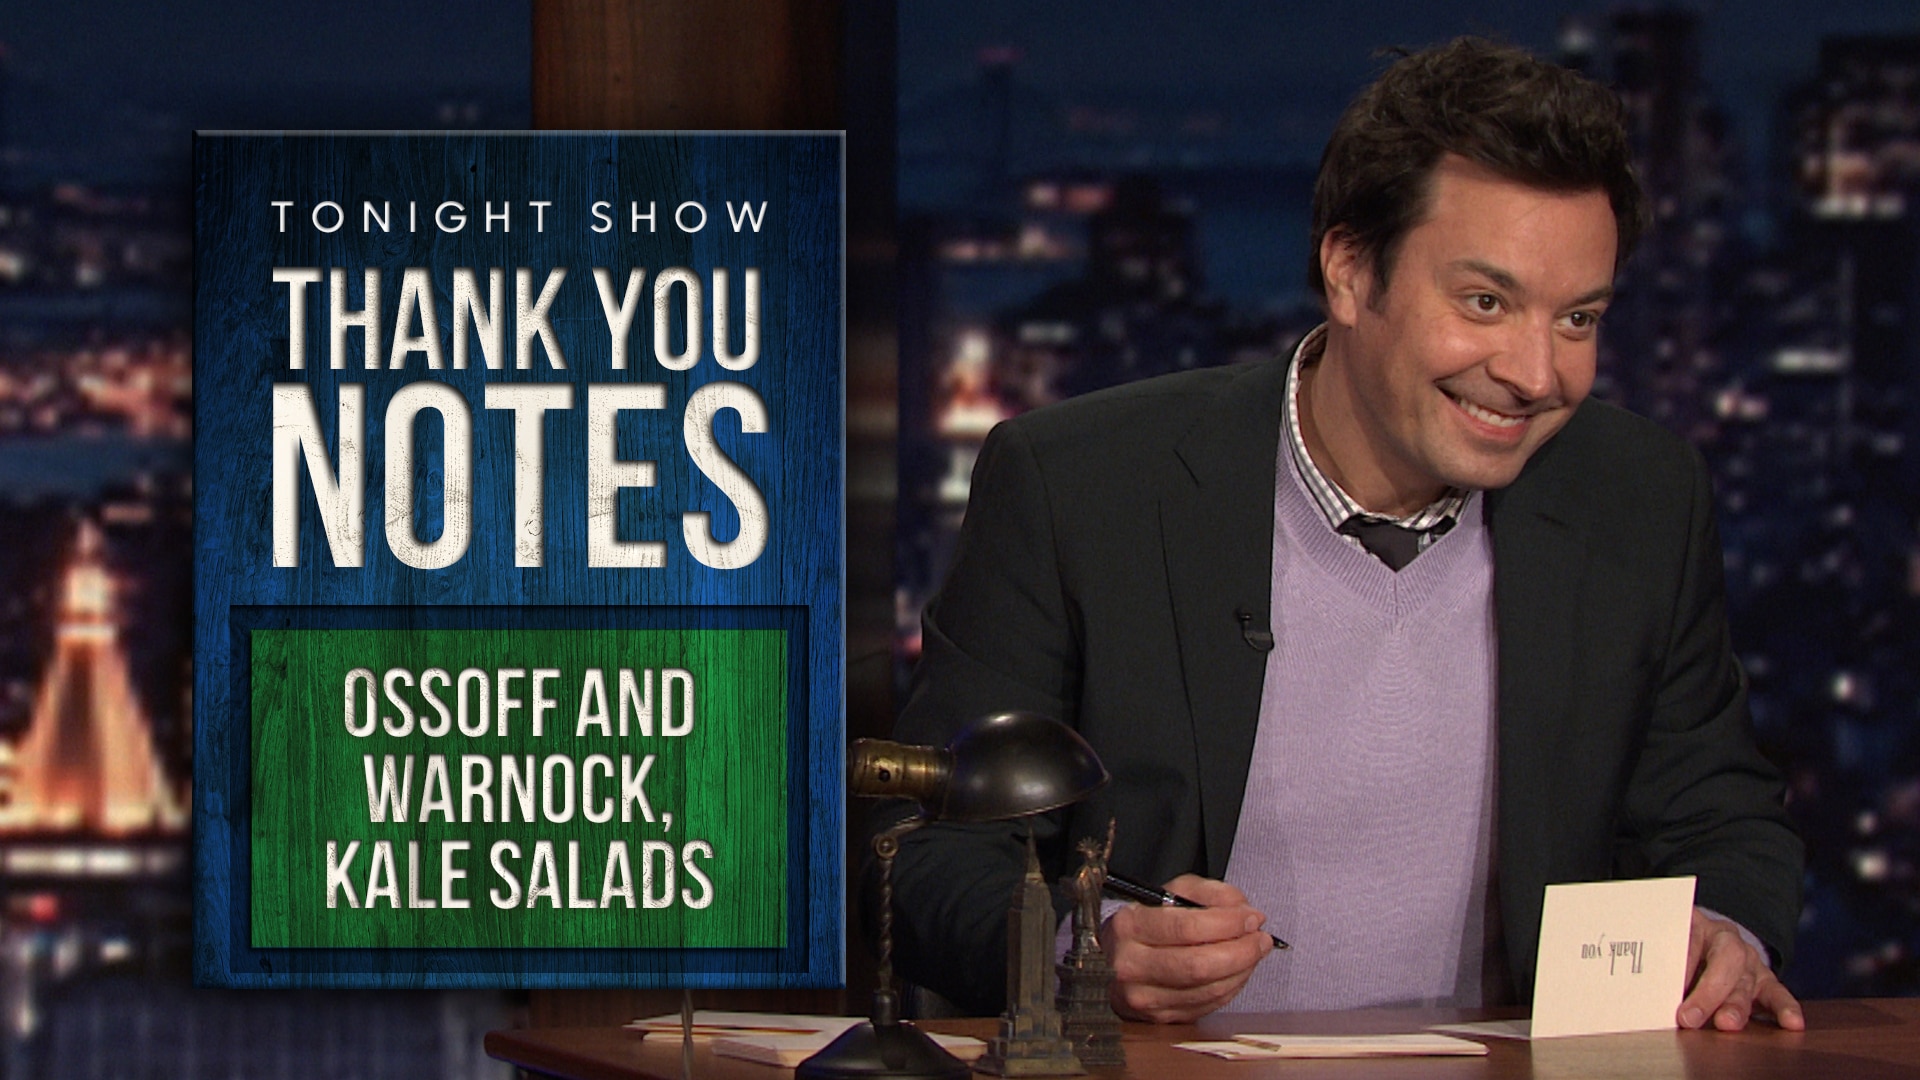 Watch The Tonight Show Starring Jimmy Fallon Highlight Thank You Notes Ossoff And Warnock